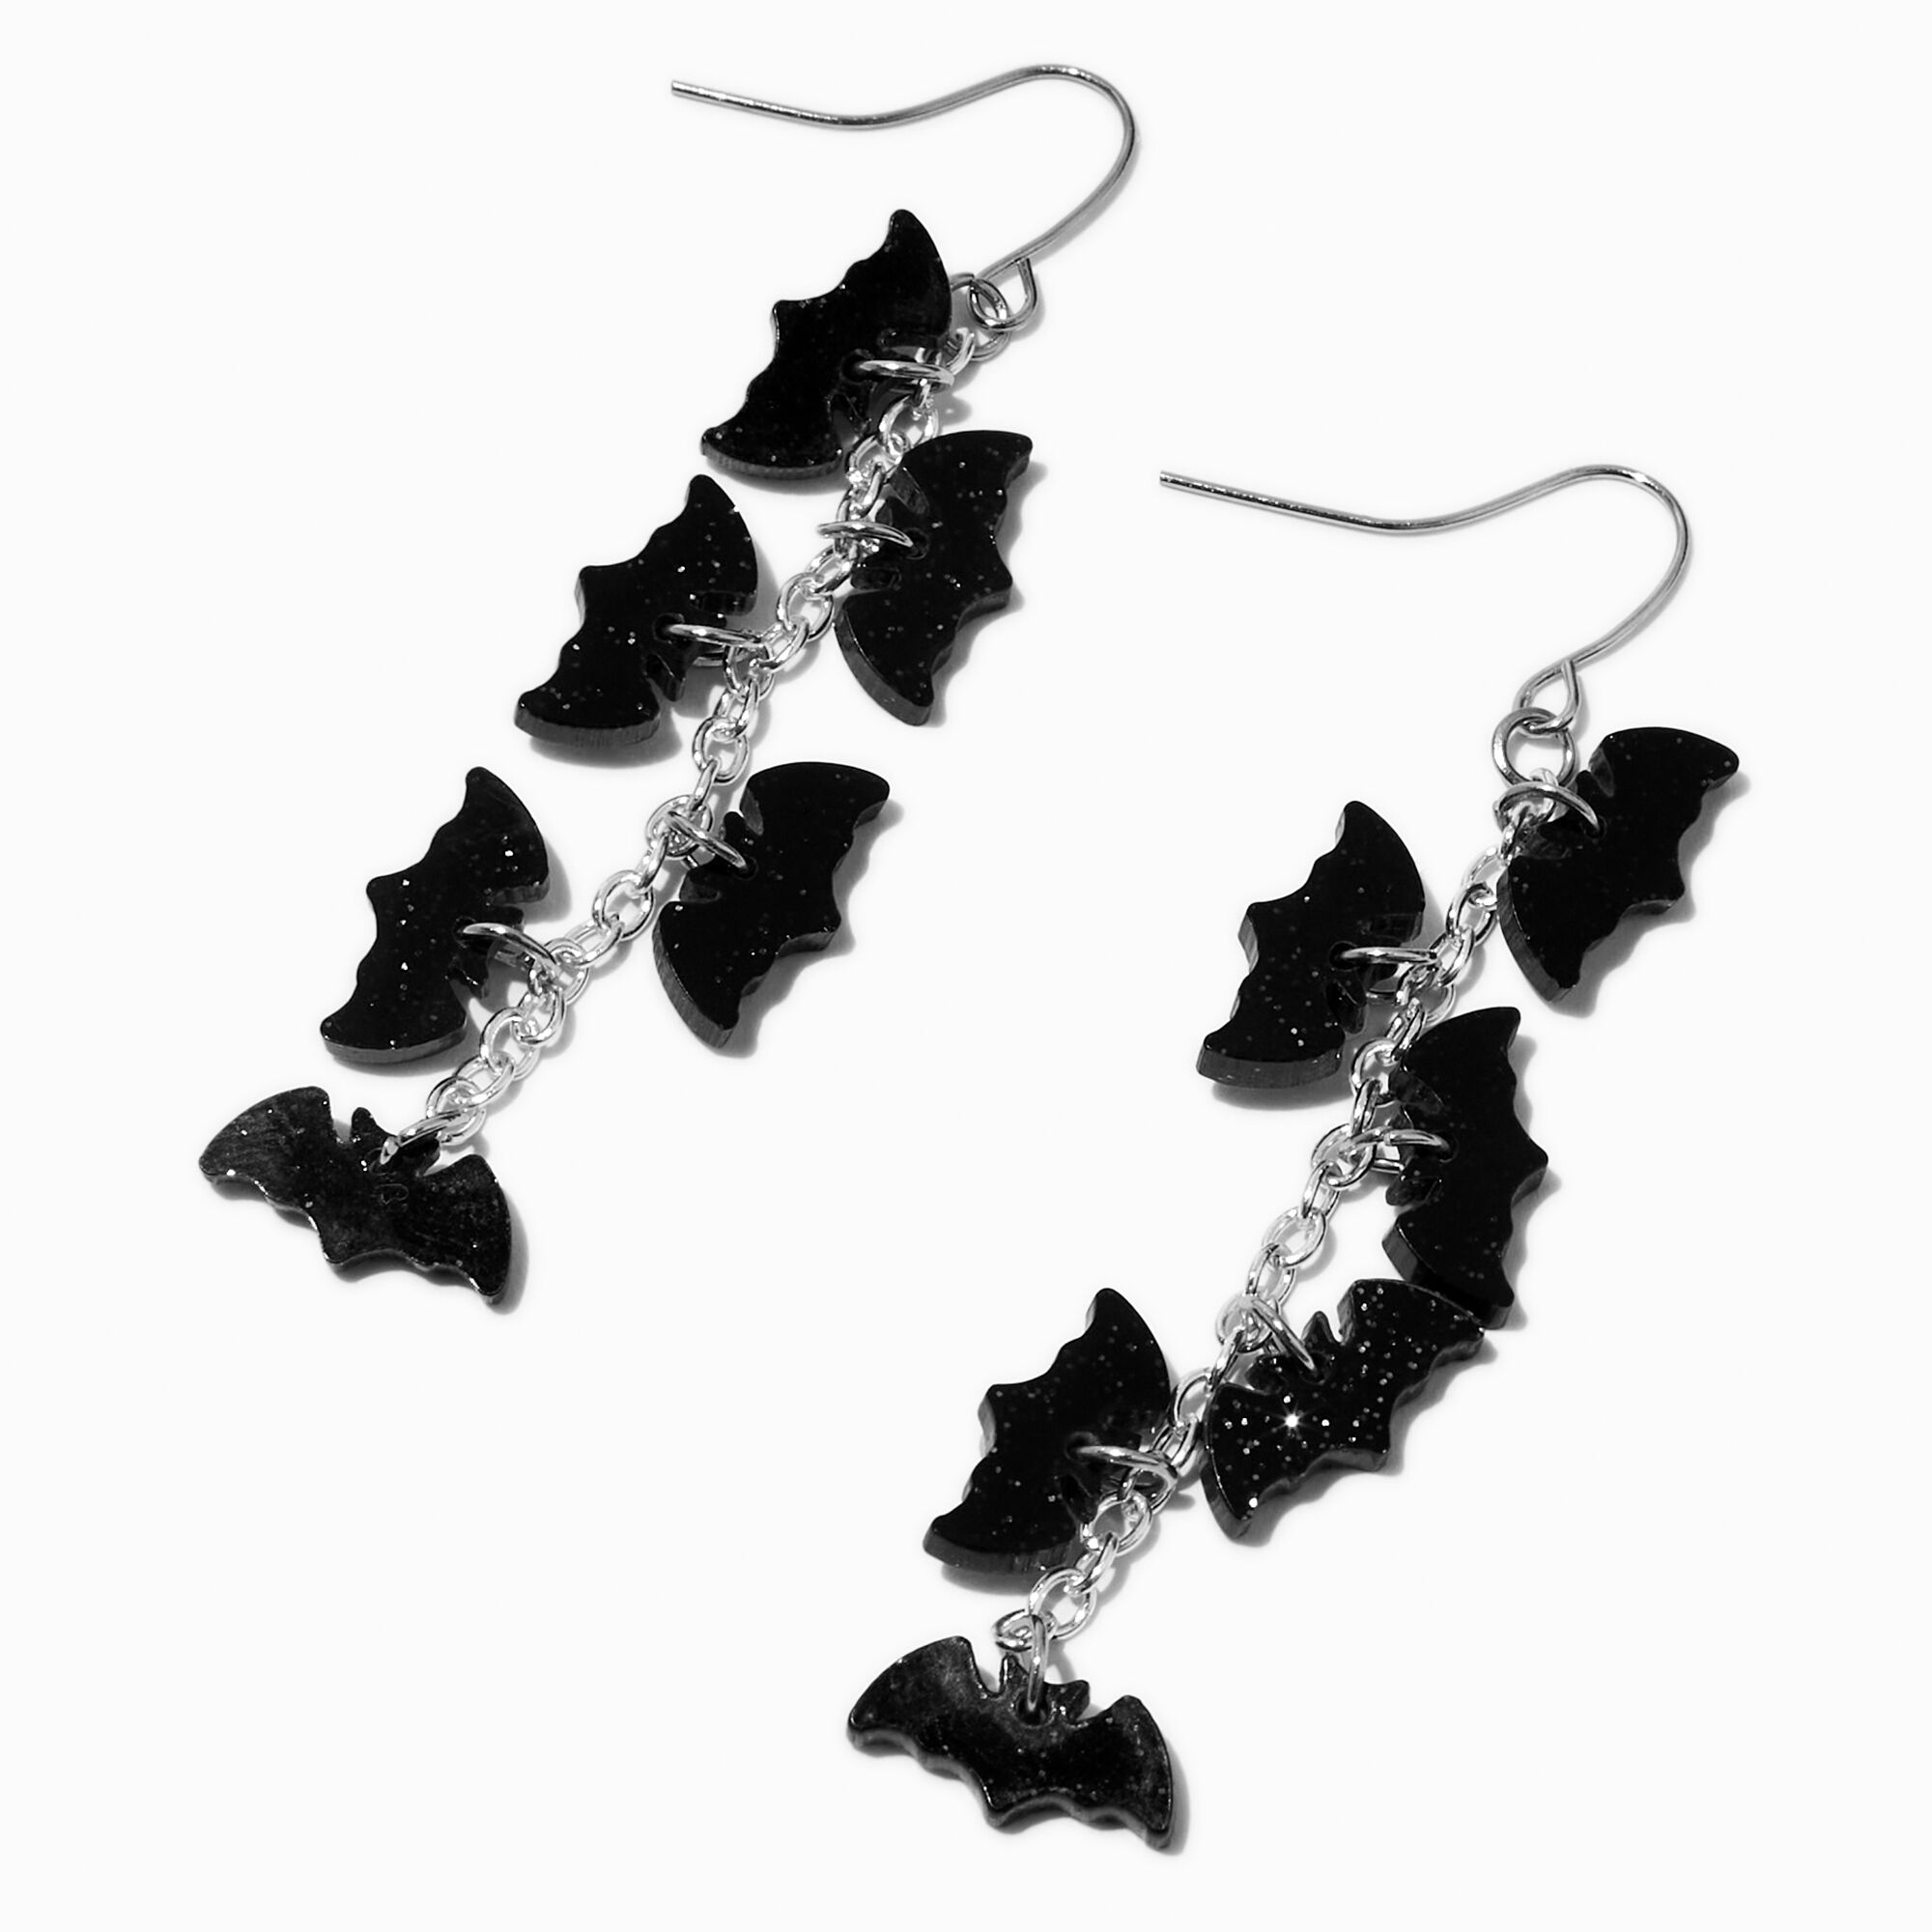 View Claires Glitter Bat Charms 2 Drop Earrings Black information